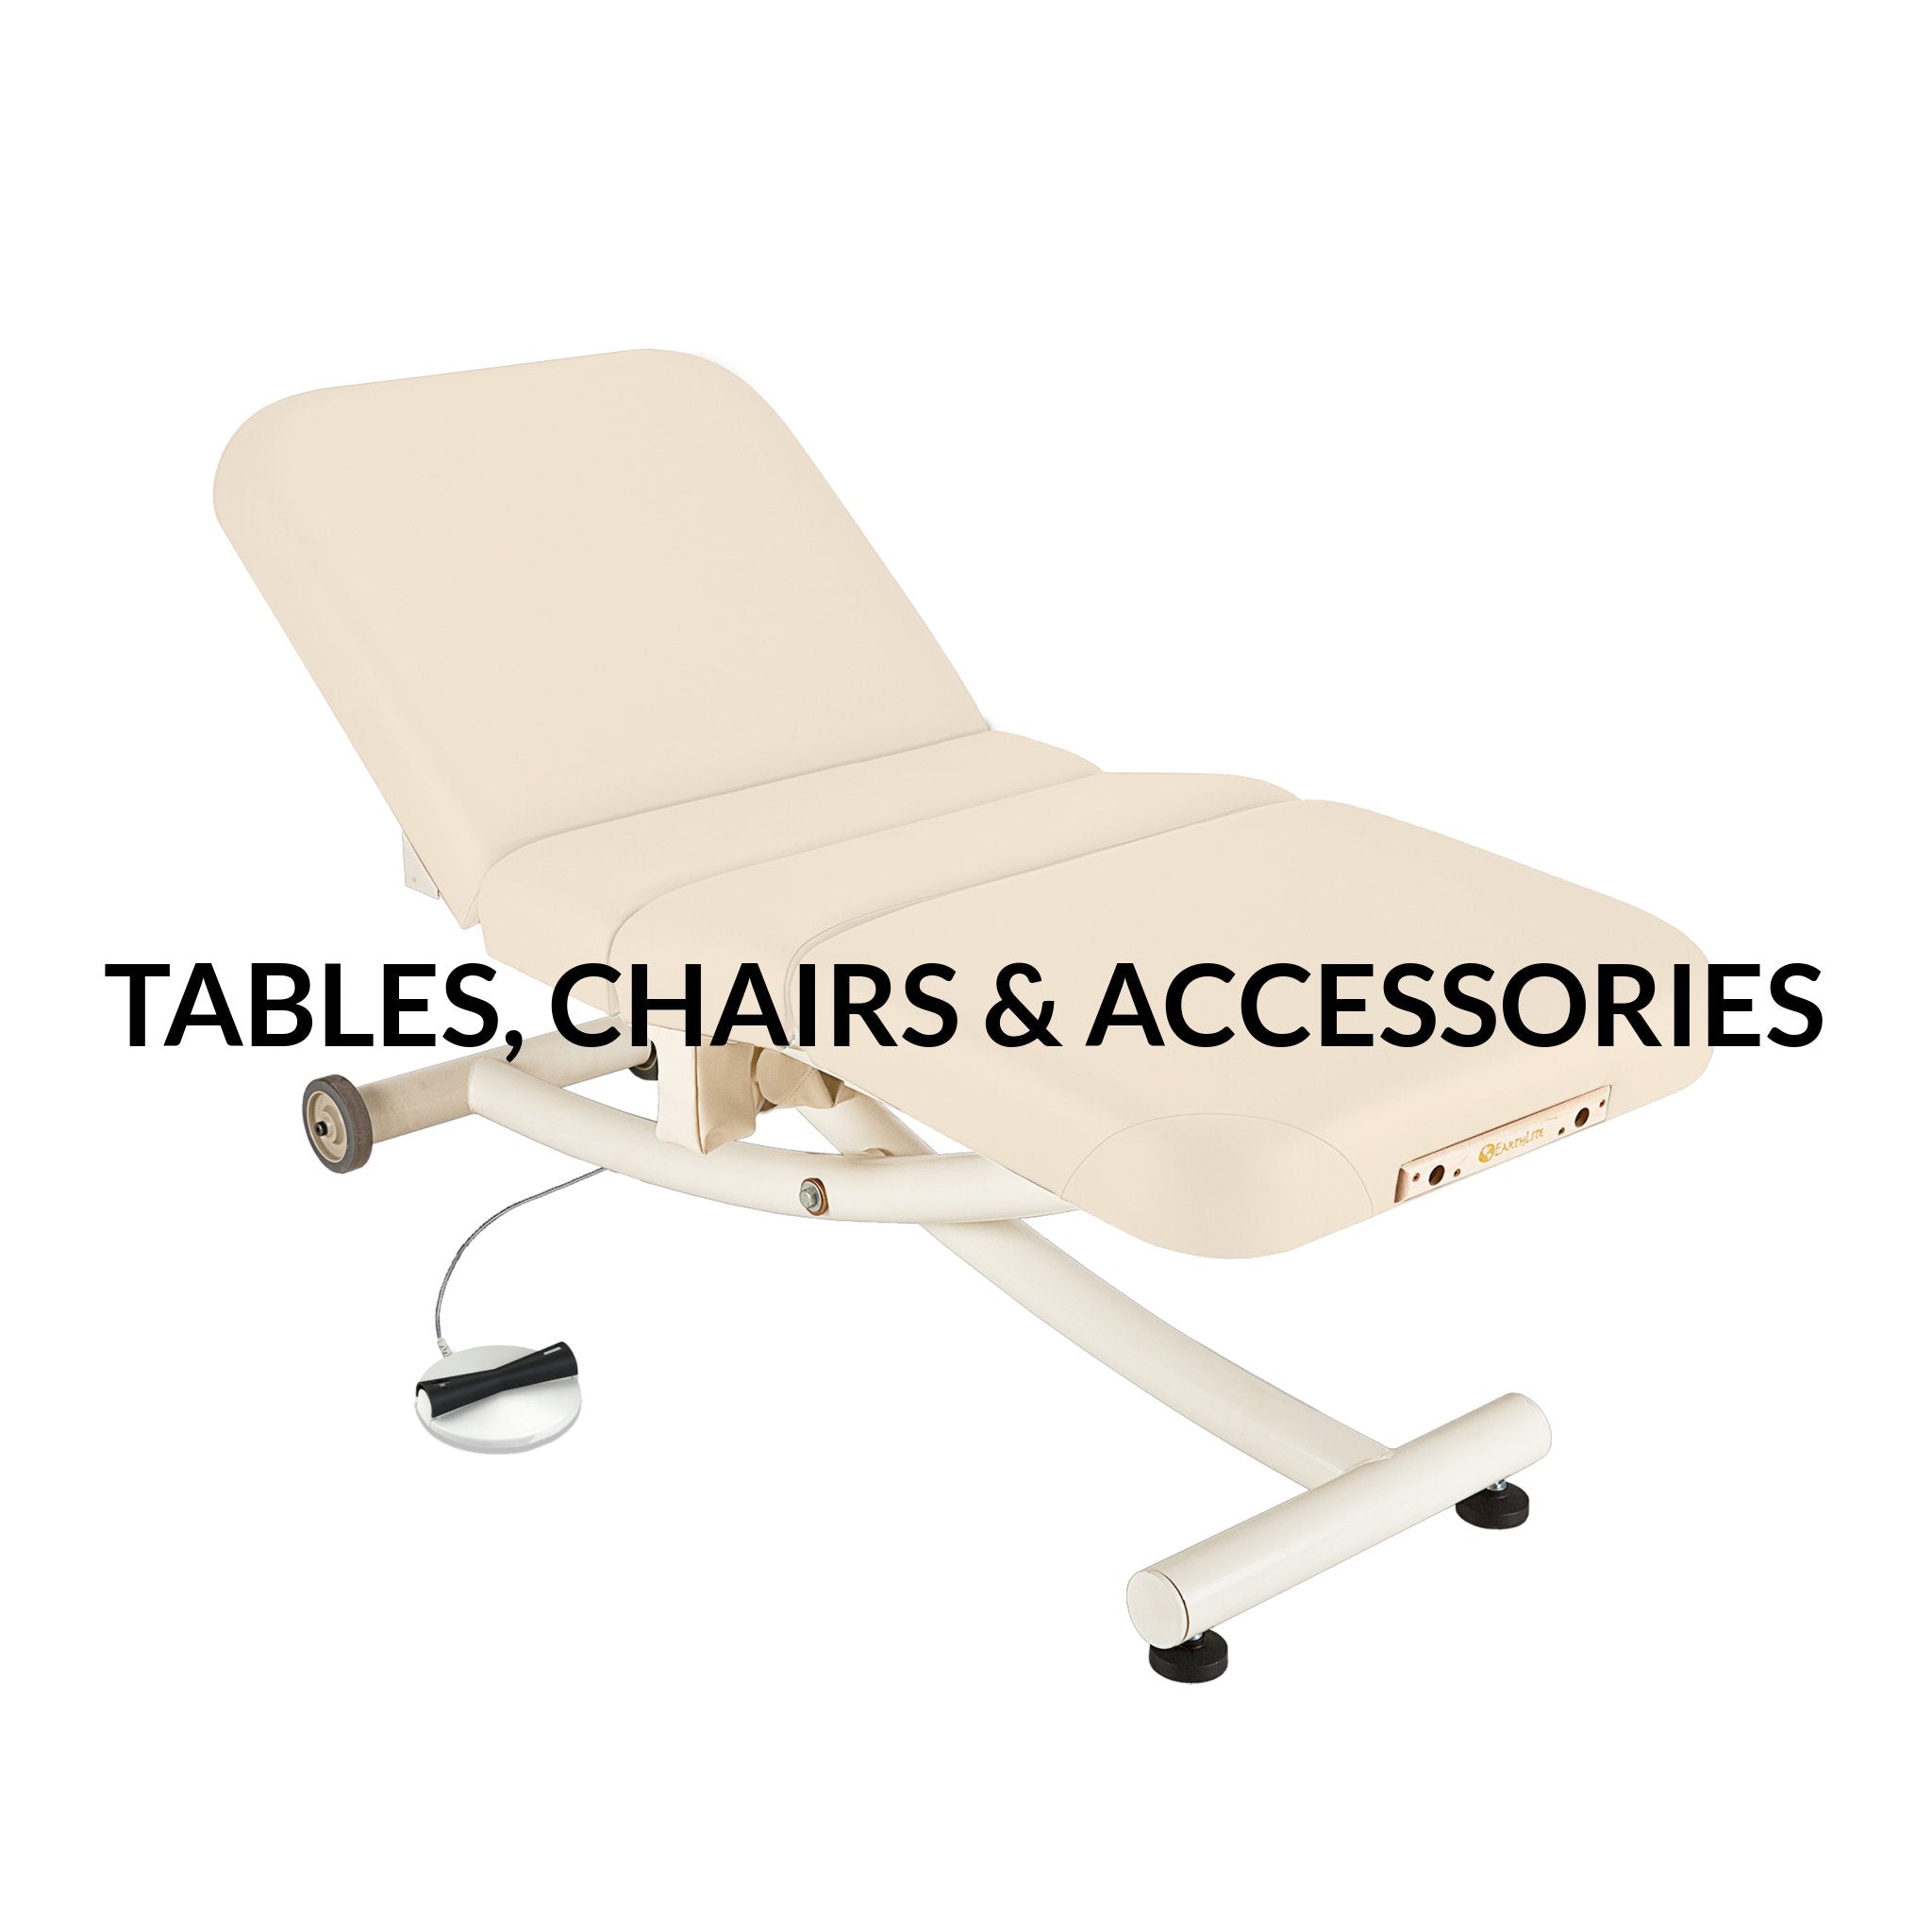 https://cdn.shopify.com/s/files/1/2352/6395/collections/massage-mercantile-tables-chairs-accessories.jpg?v=1514985292